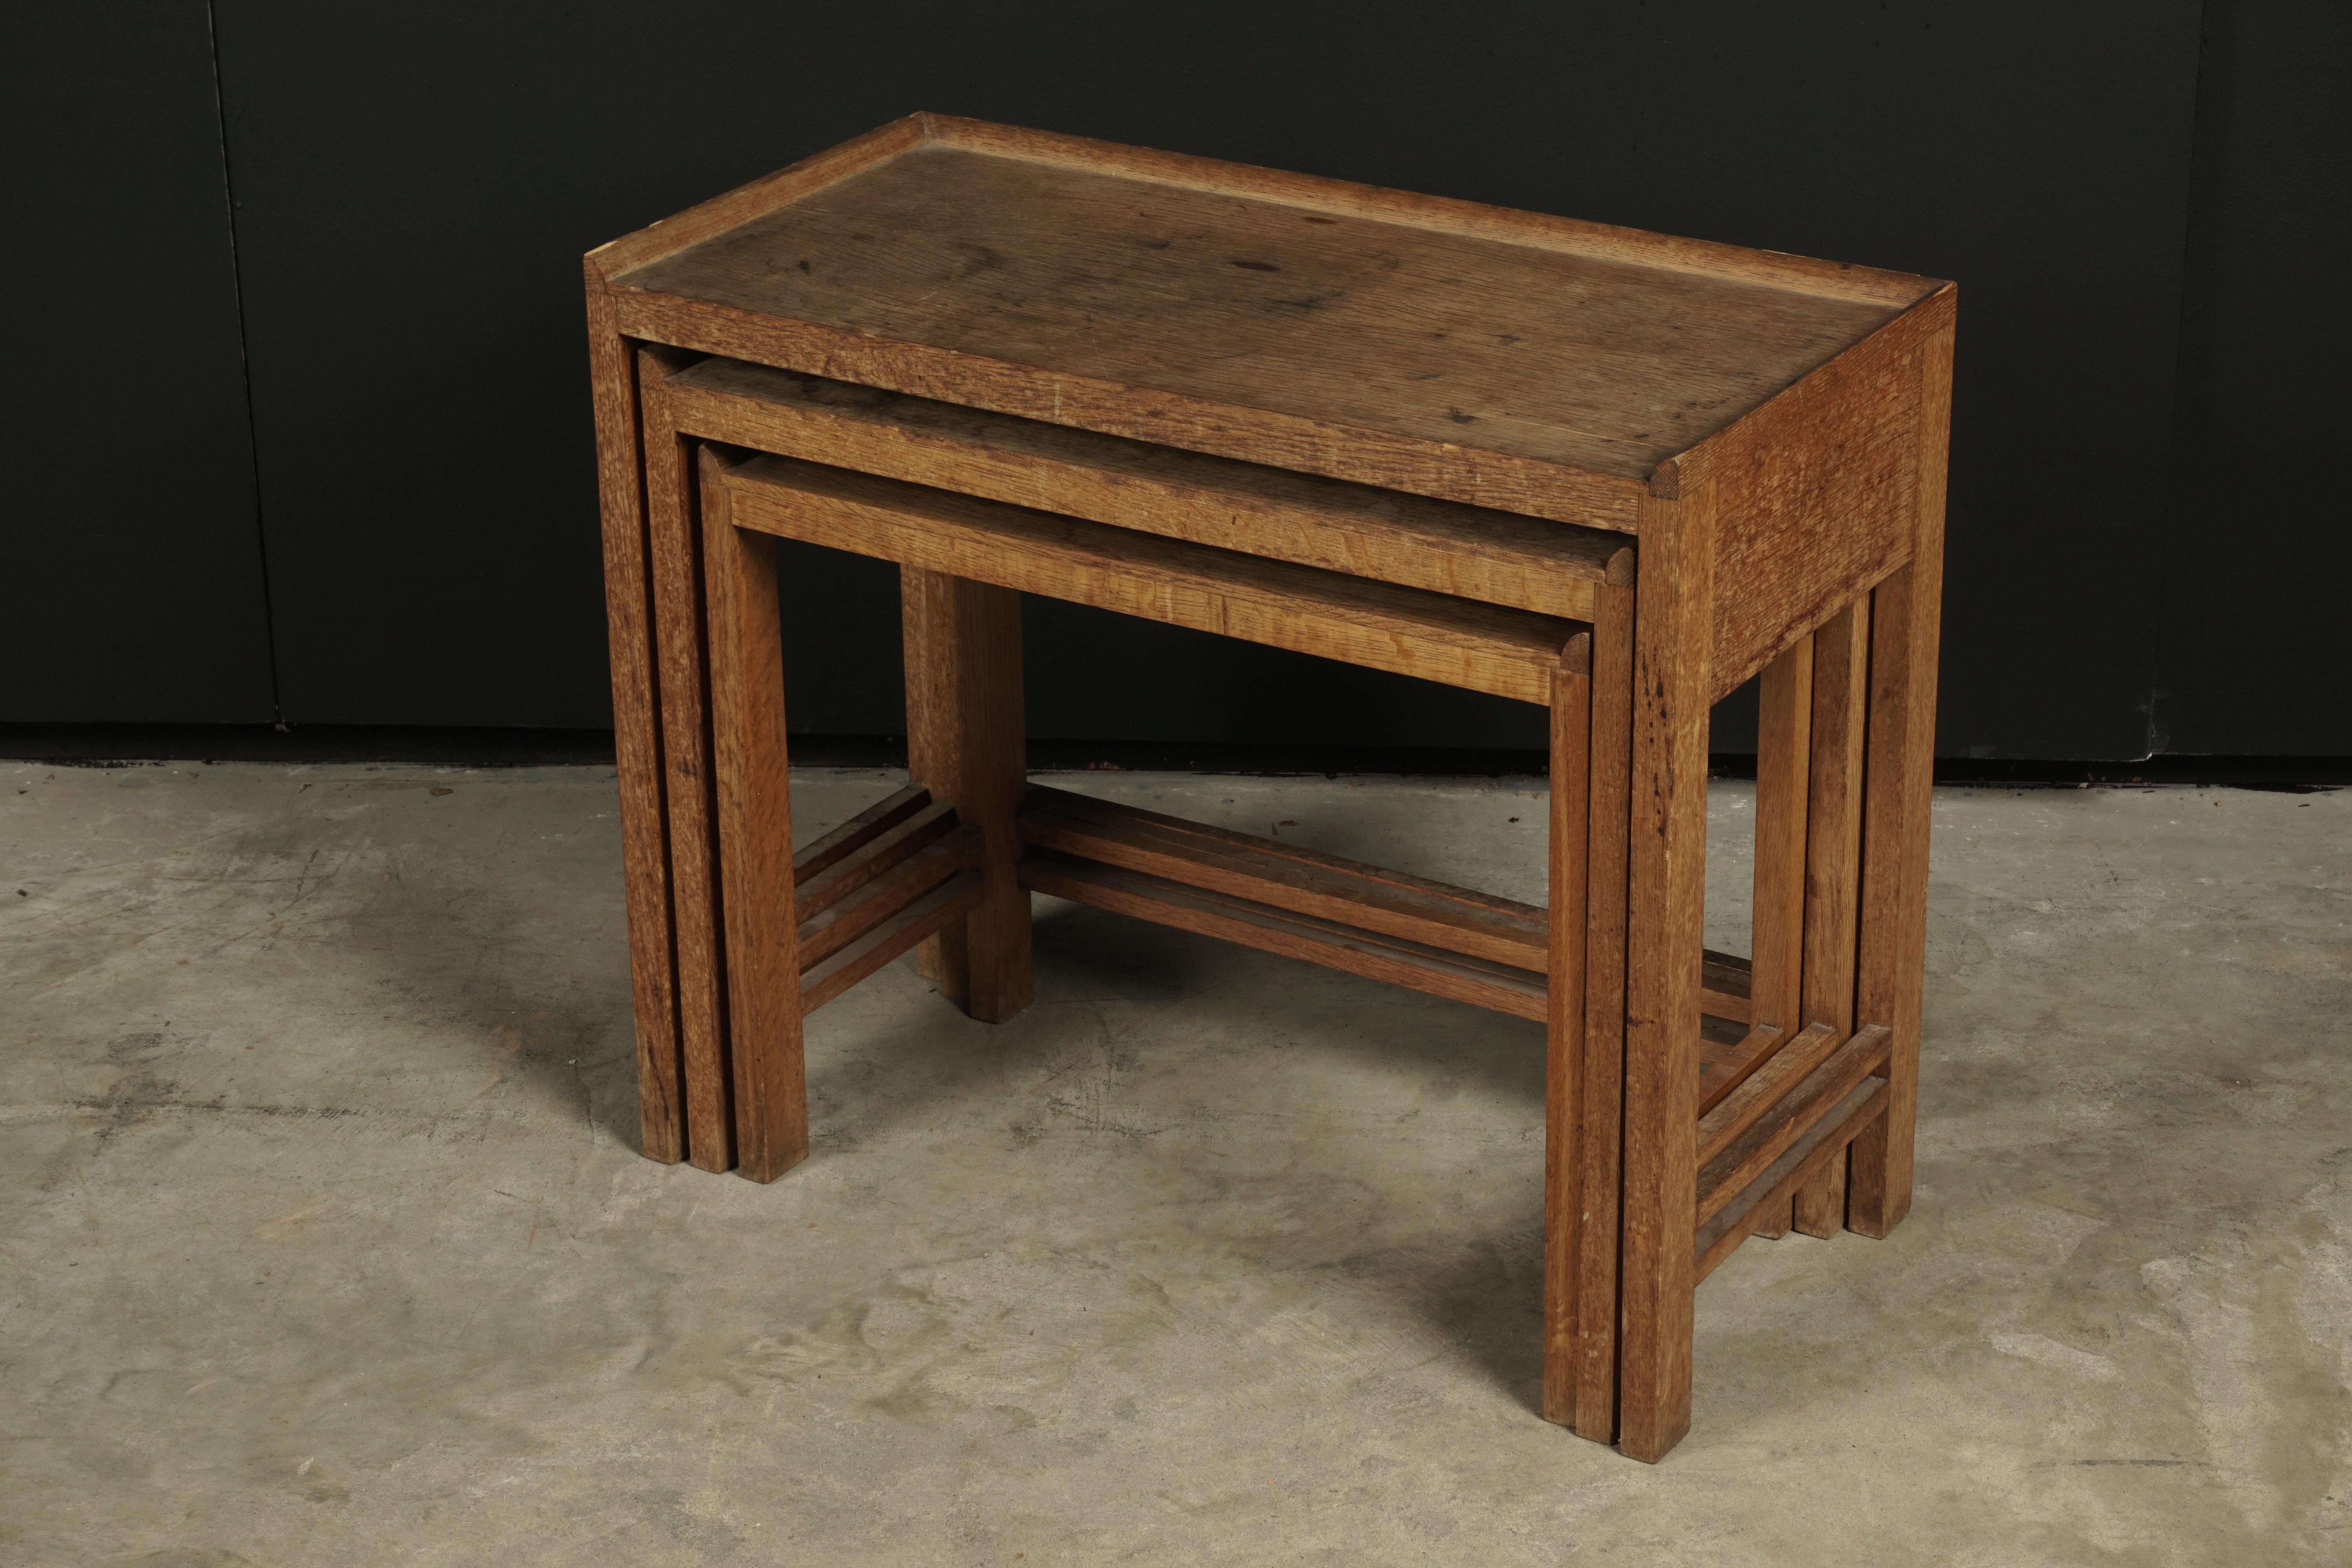 Set of three midcentury nesting tables from France, circa 1950. Solid oak construction with original patina.